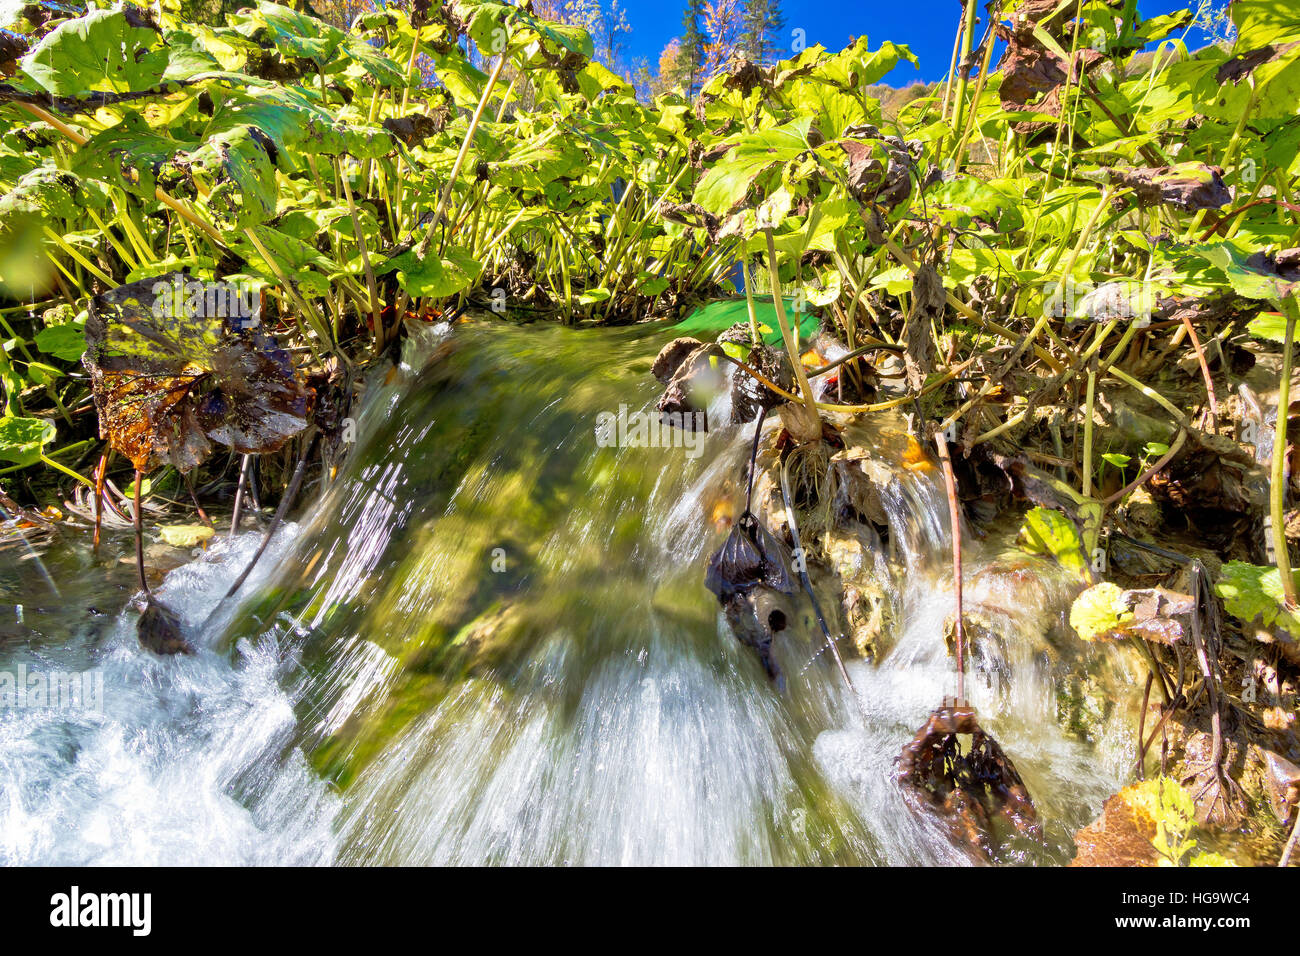 Plitvice lakes national park detail, flowing water and flora Stock Photo